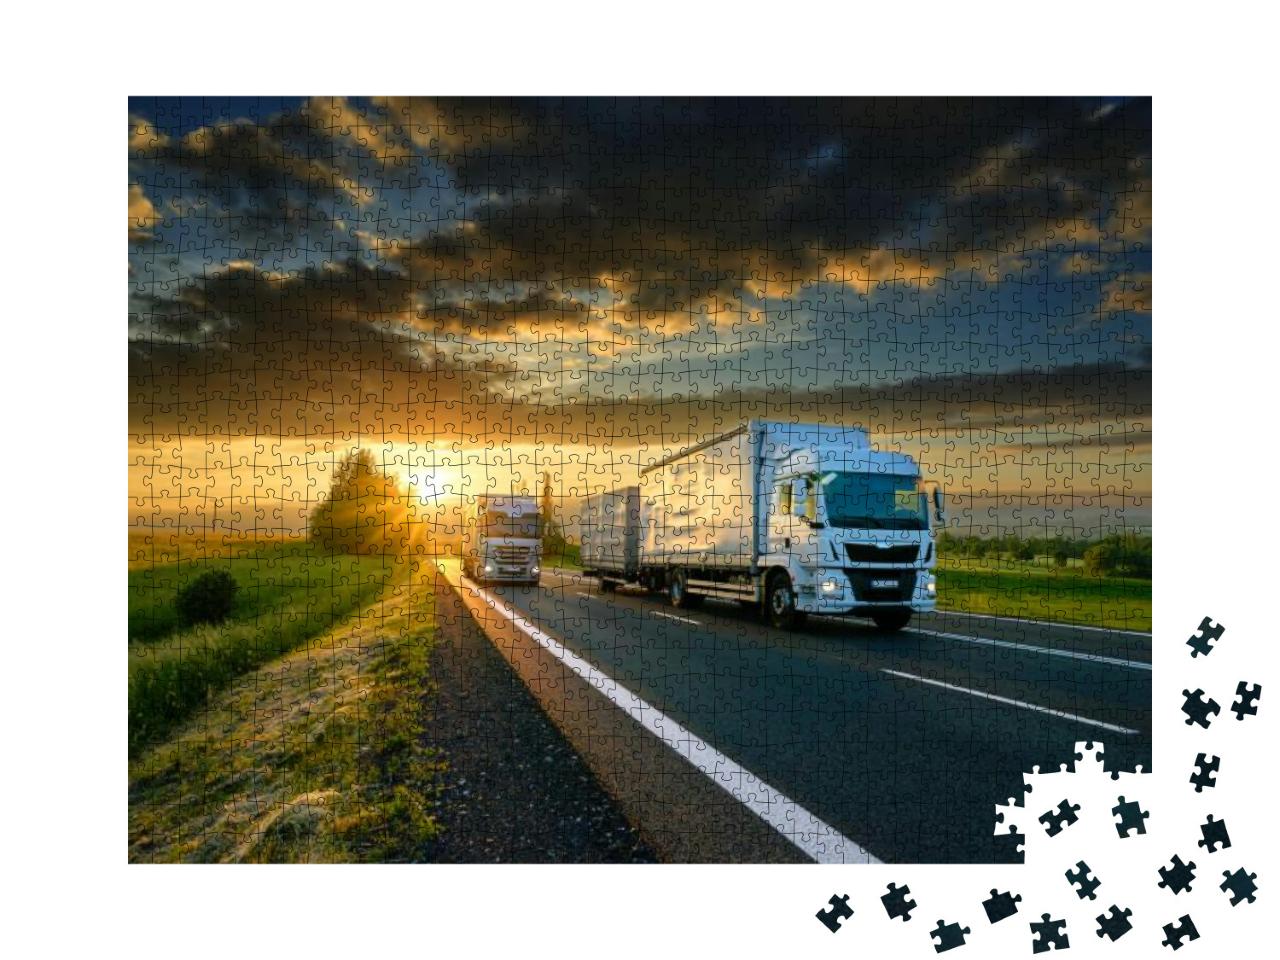 Overtaking Trucks on an Asphalt Road in a Rural Landscape... Jigsaw Puzzle with 1000 pieces